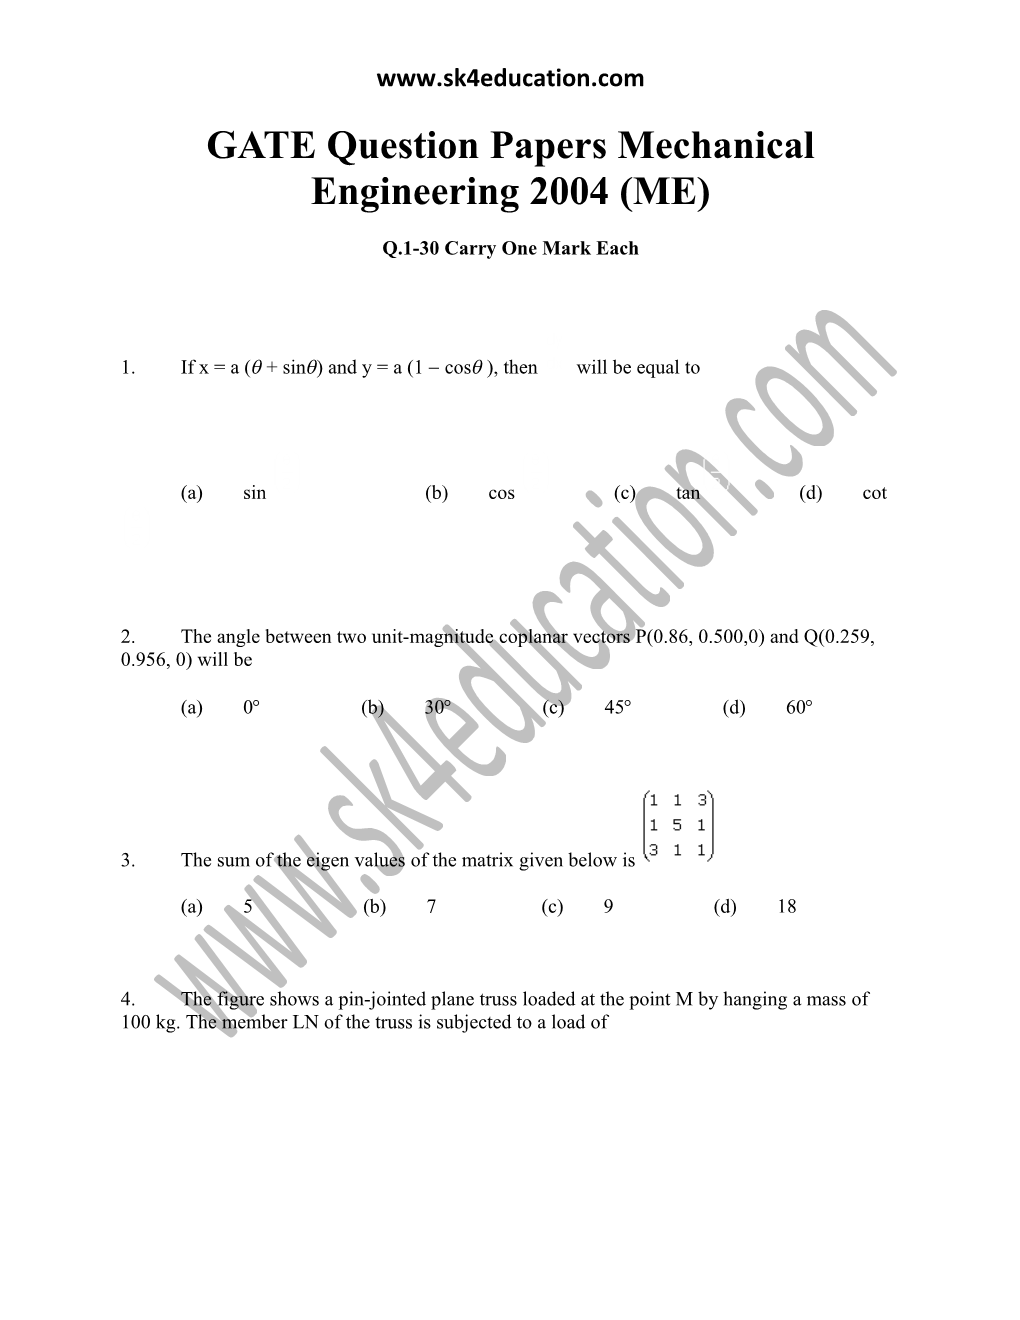 GATE Question Papers Mechanical Engineering 2004 (ME)